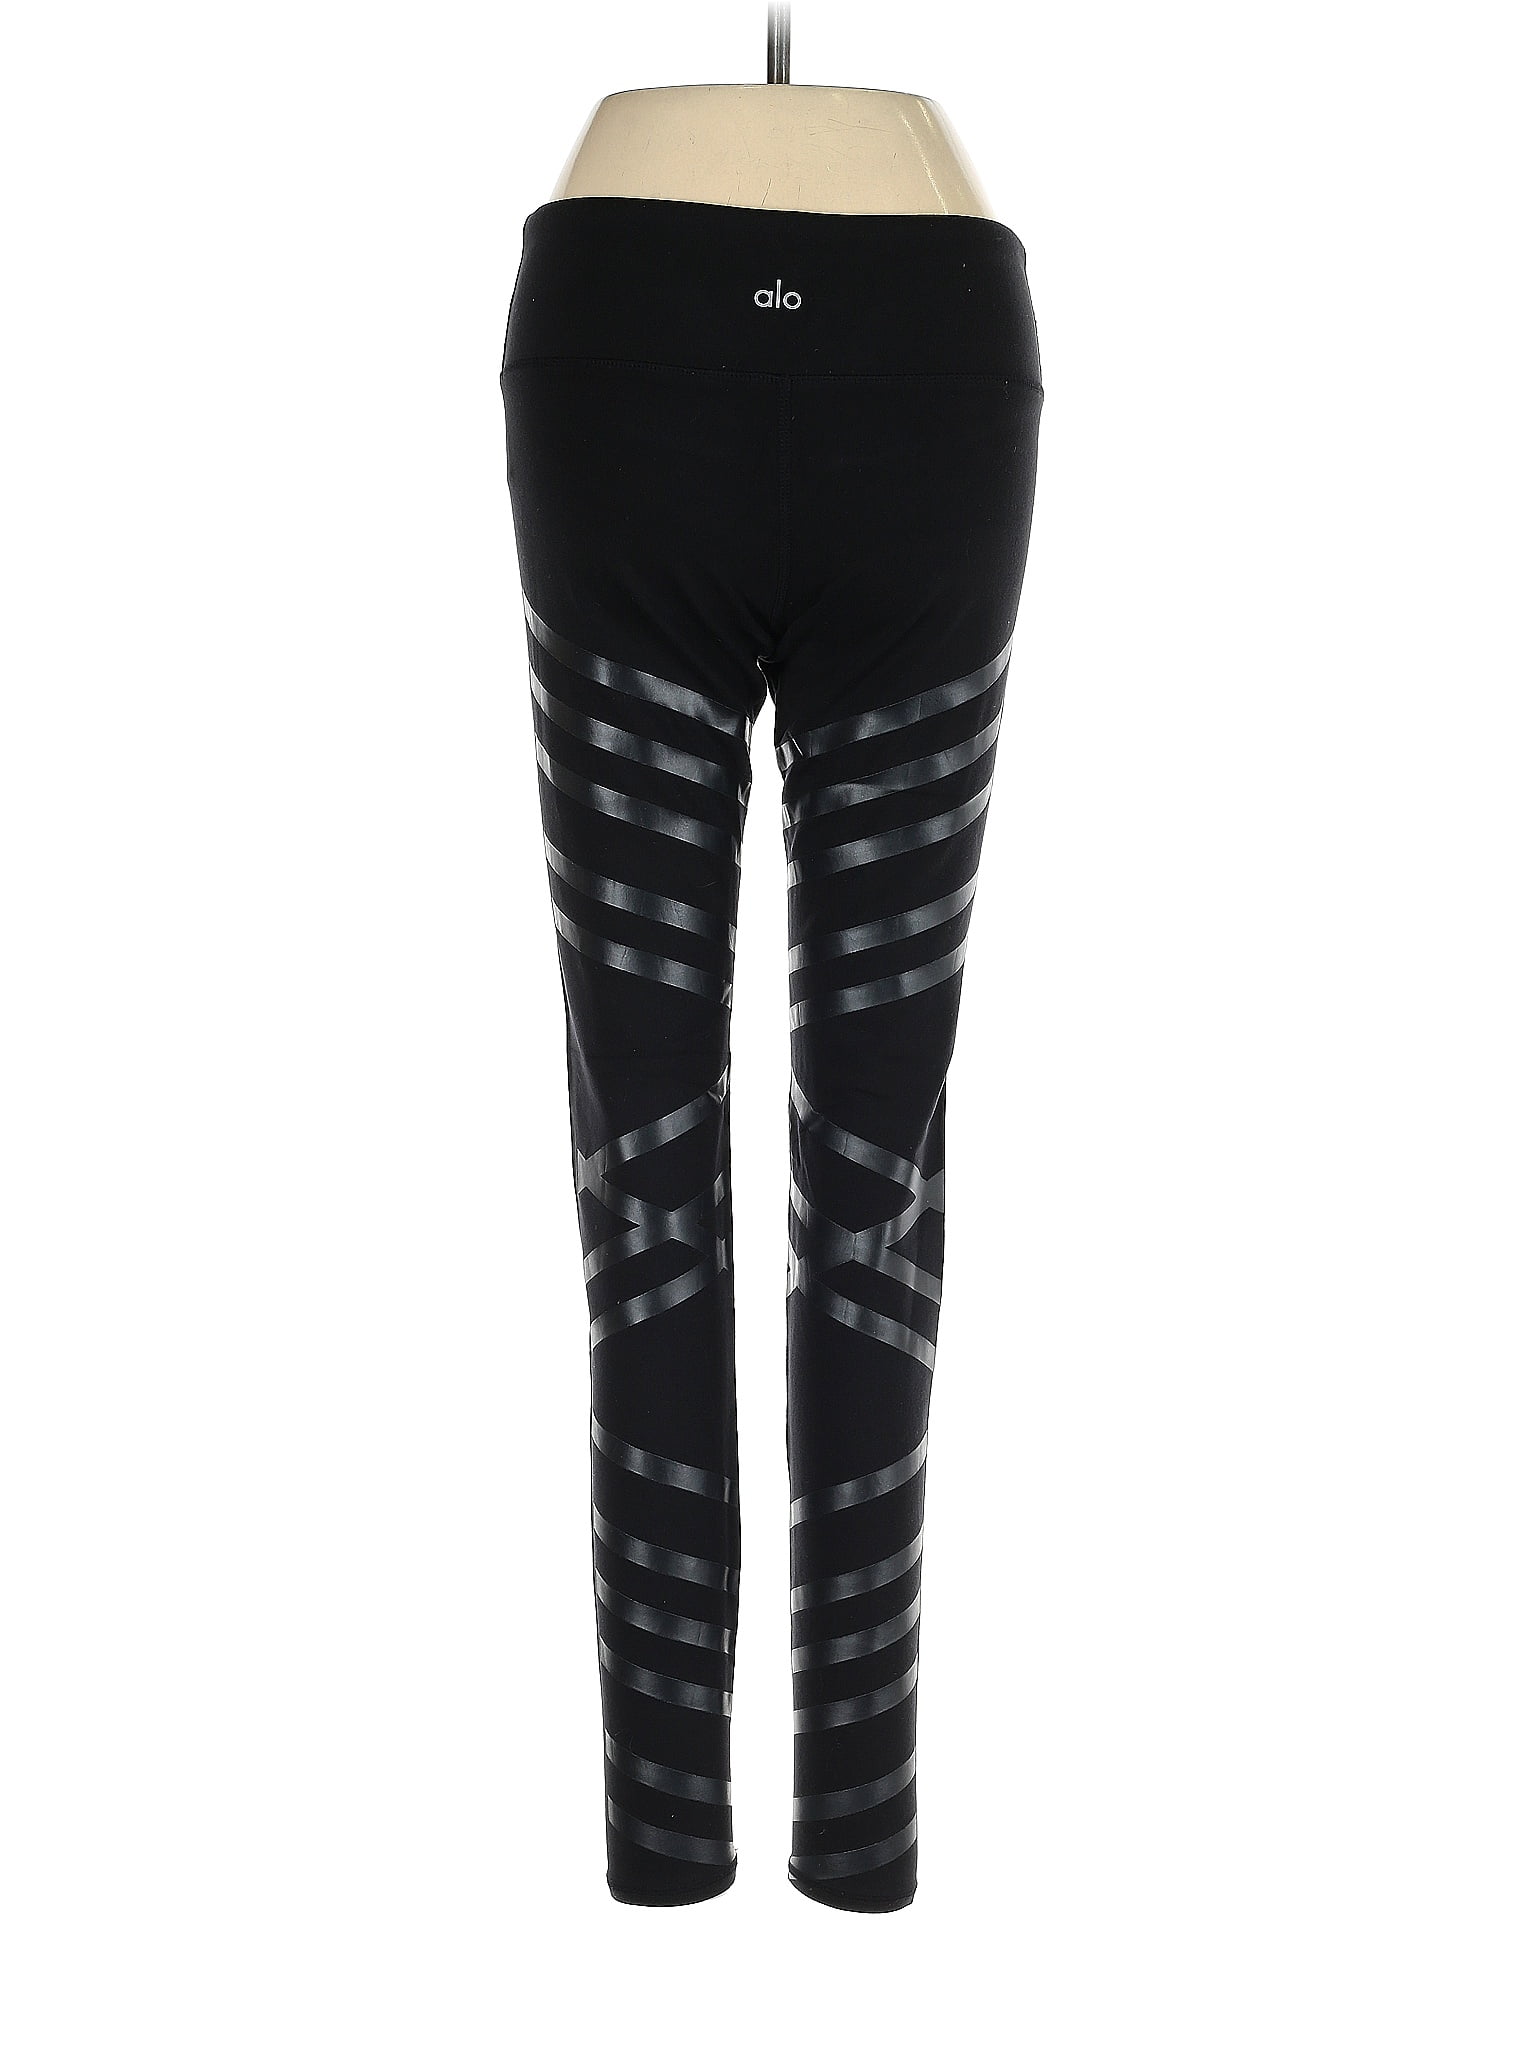 Alo Solid Black Leggings Size XS - 47% off